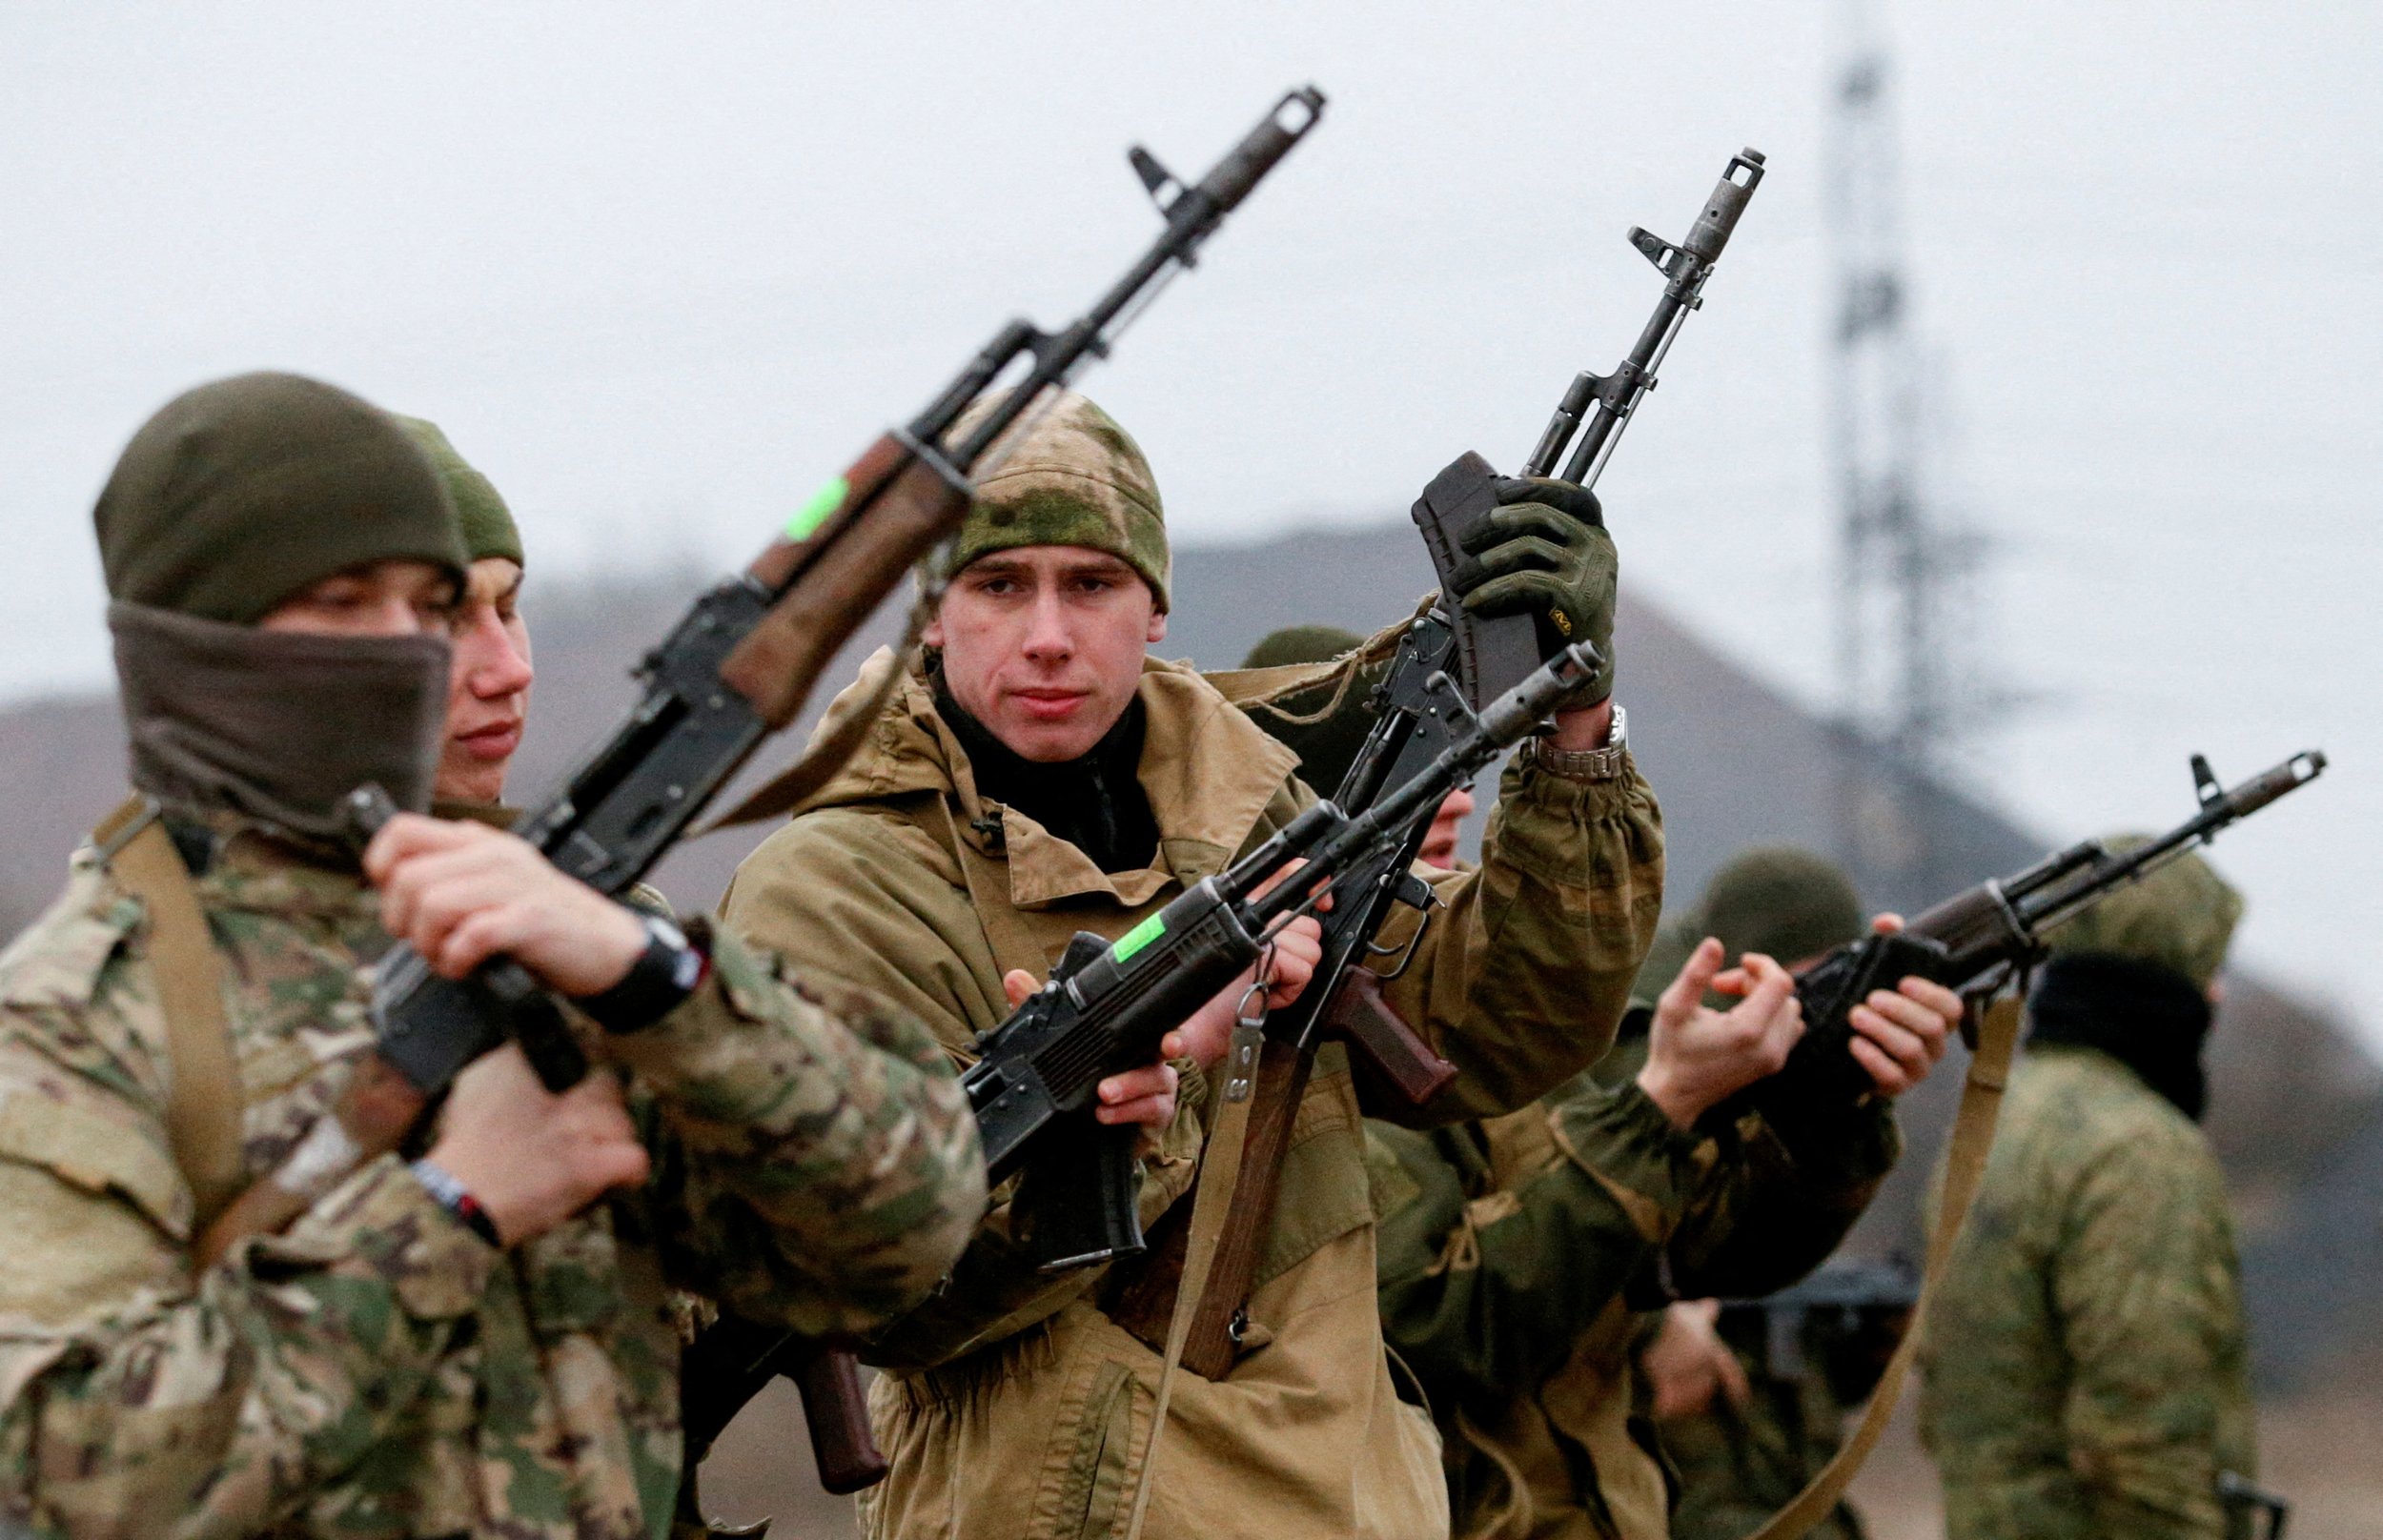 FILE PHOTO: Militants of the self-proclaimed Donetsk People's Republic take part in shooting drills at a range on the outskirts of Donetsk, Ukraine, December 14, 2021. REUTERS/Alexander Ermochenko/File Photo